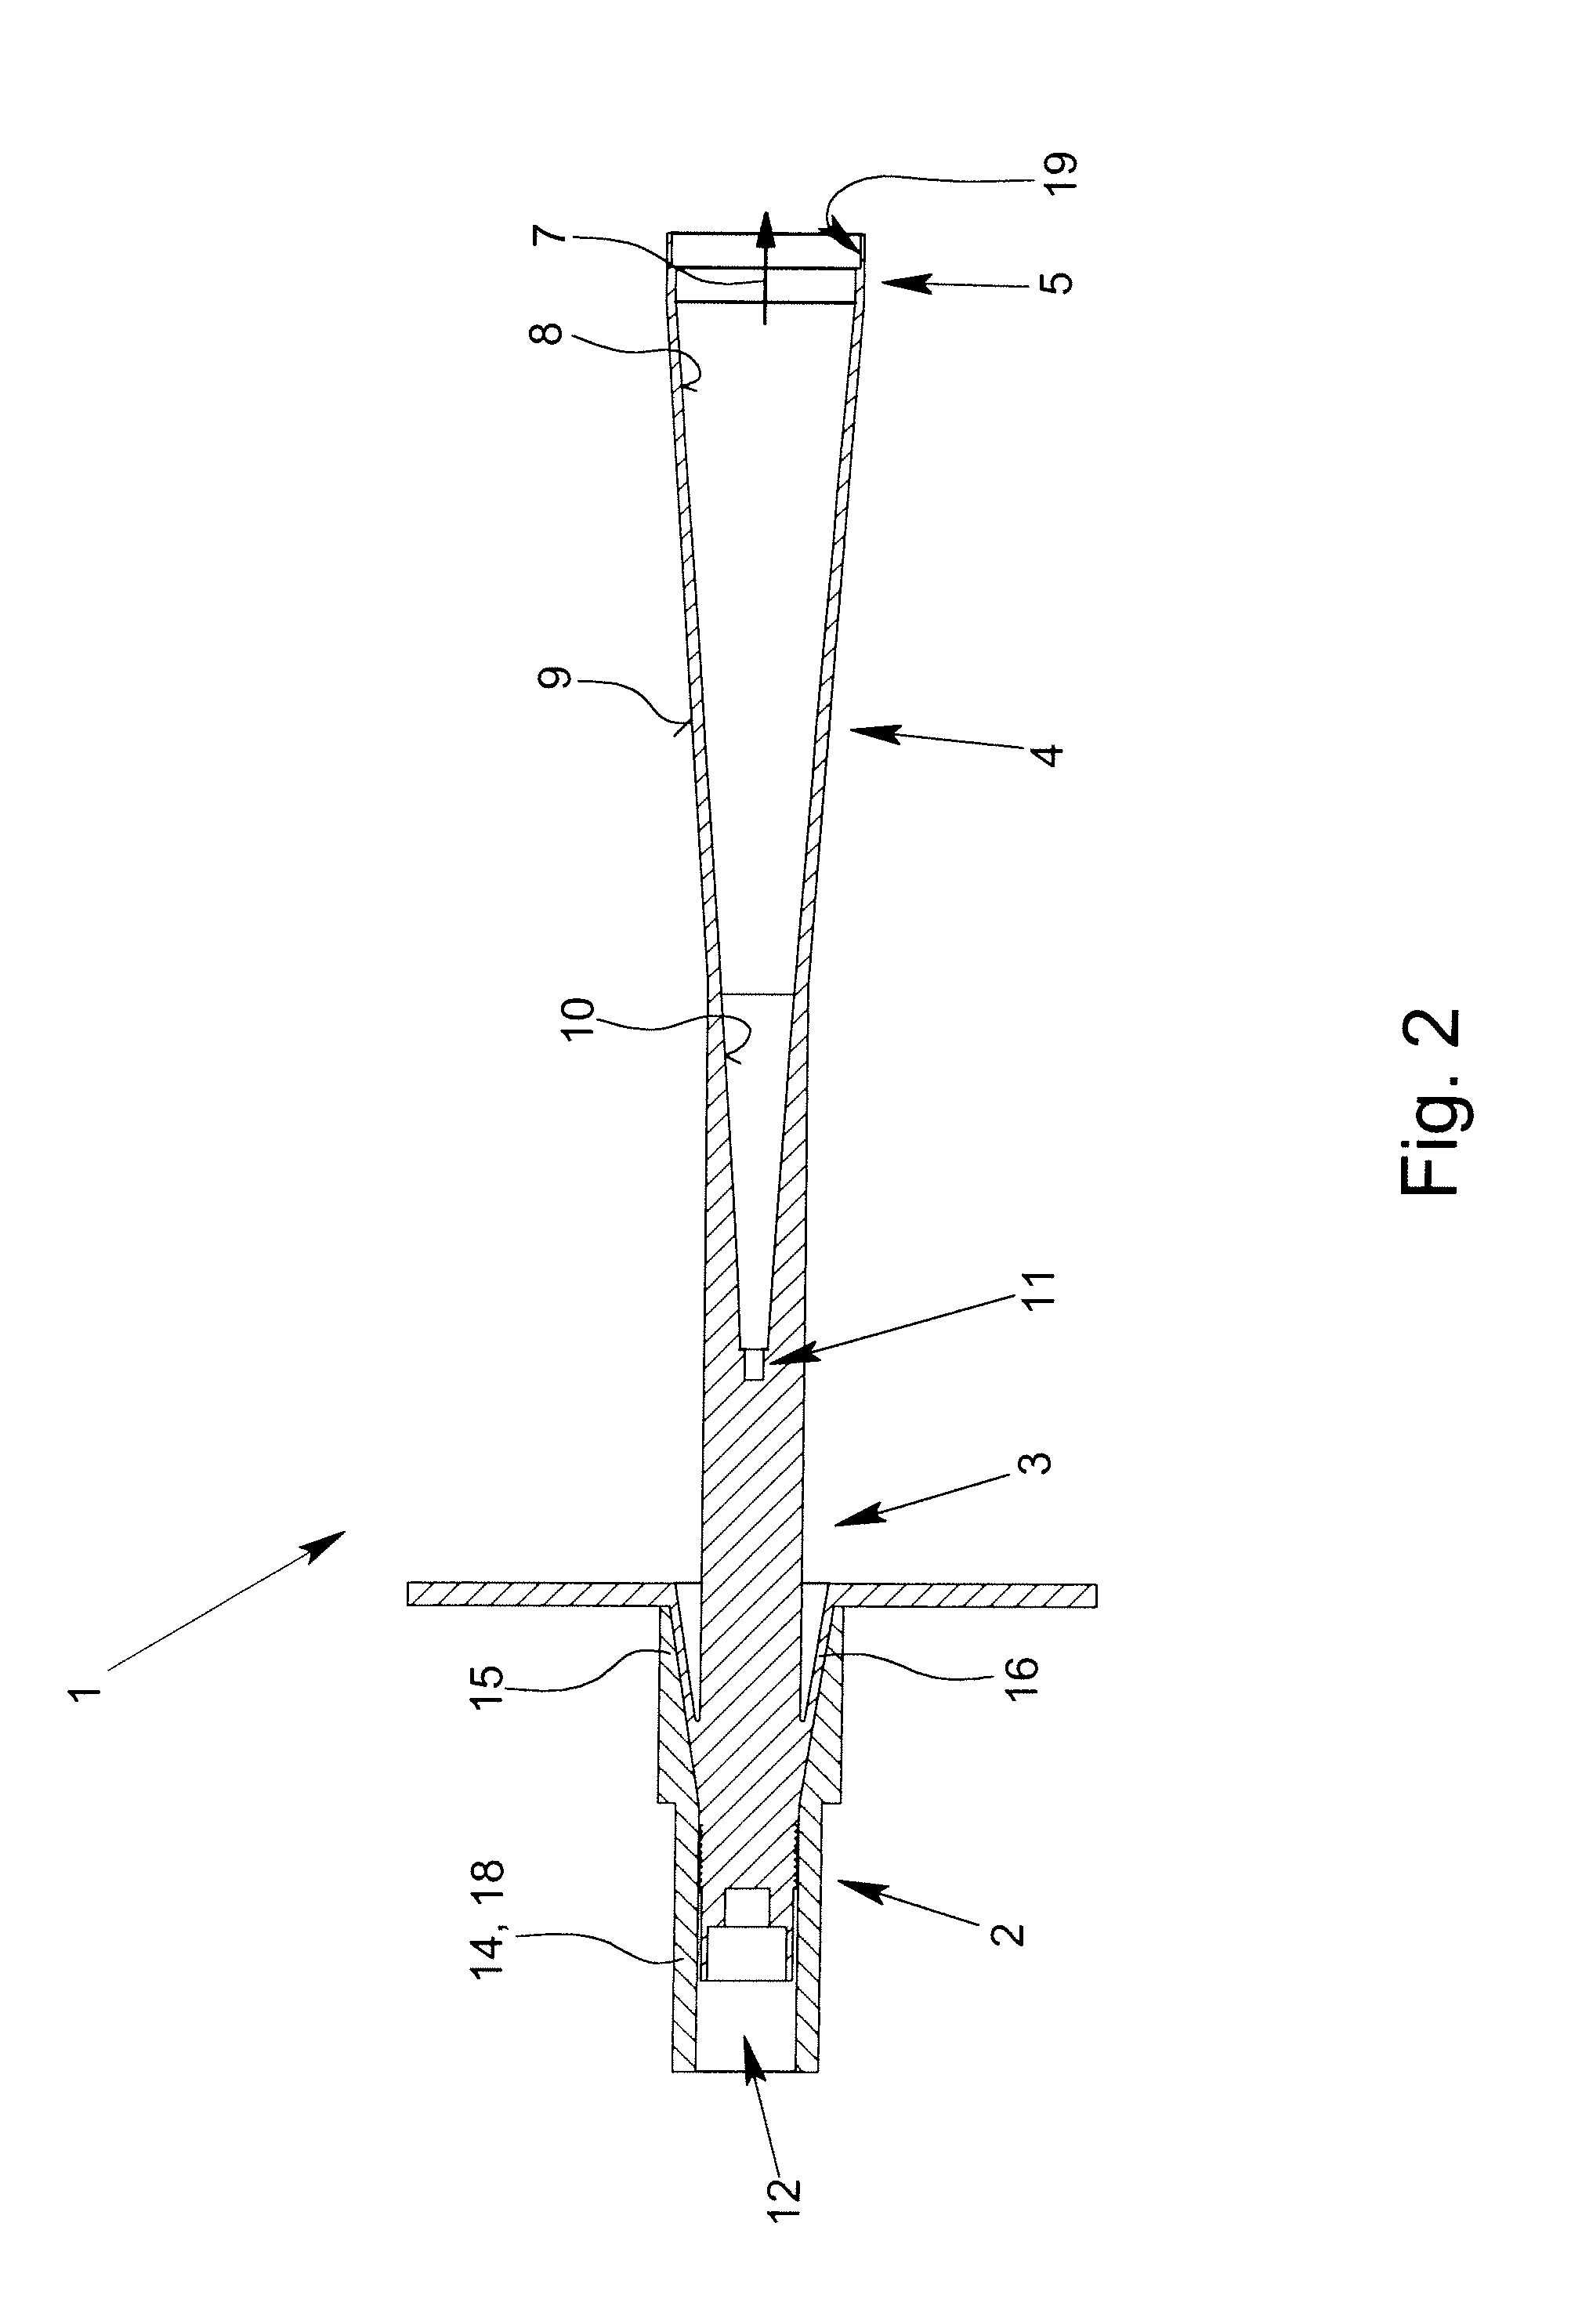 Dielectric antenna